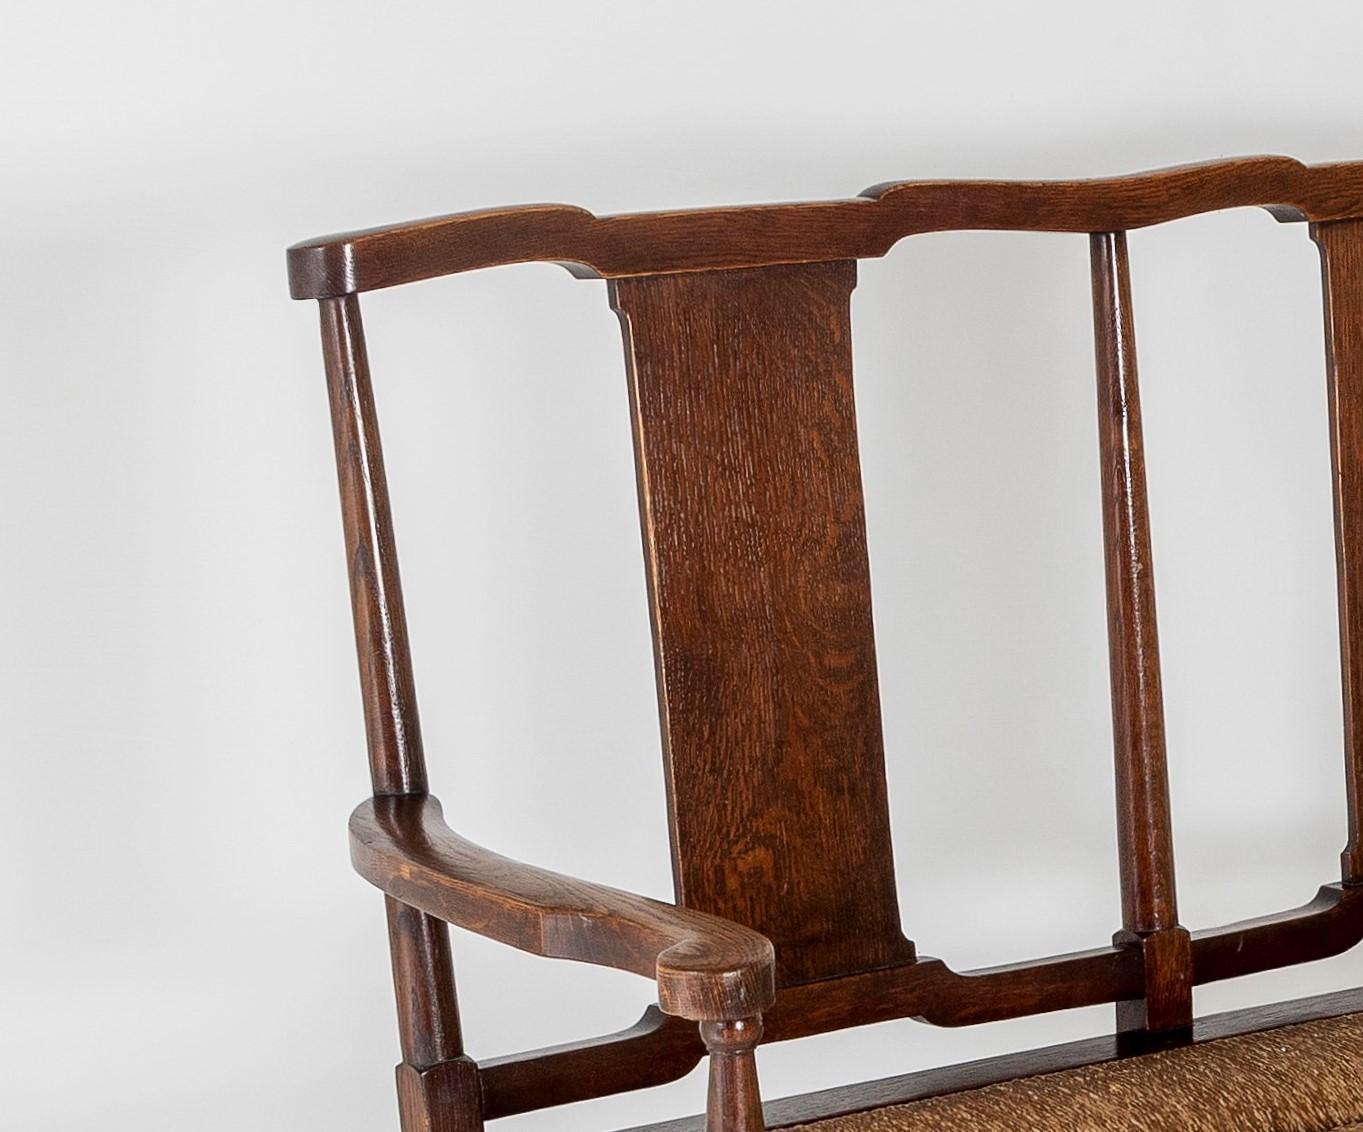 19th Century Oak Arts & Craft Bench with Rush Seat in the manner of William Morris & Co